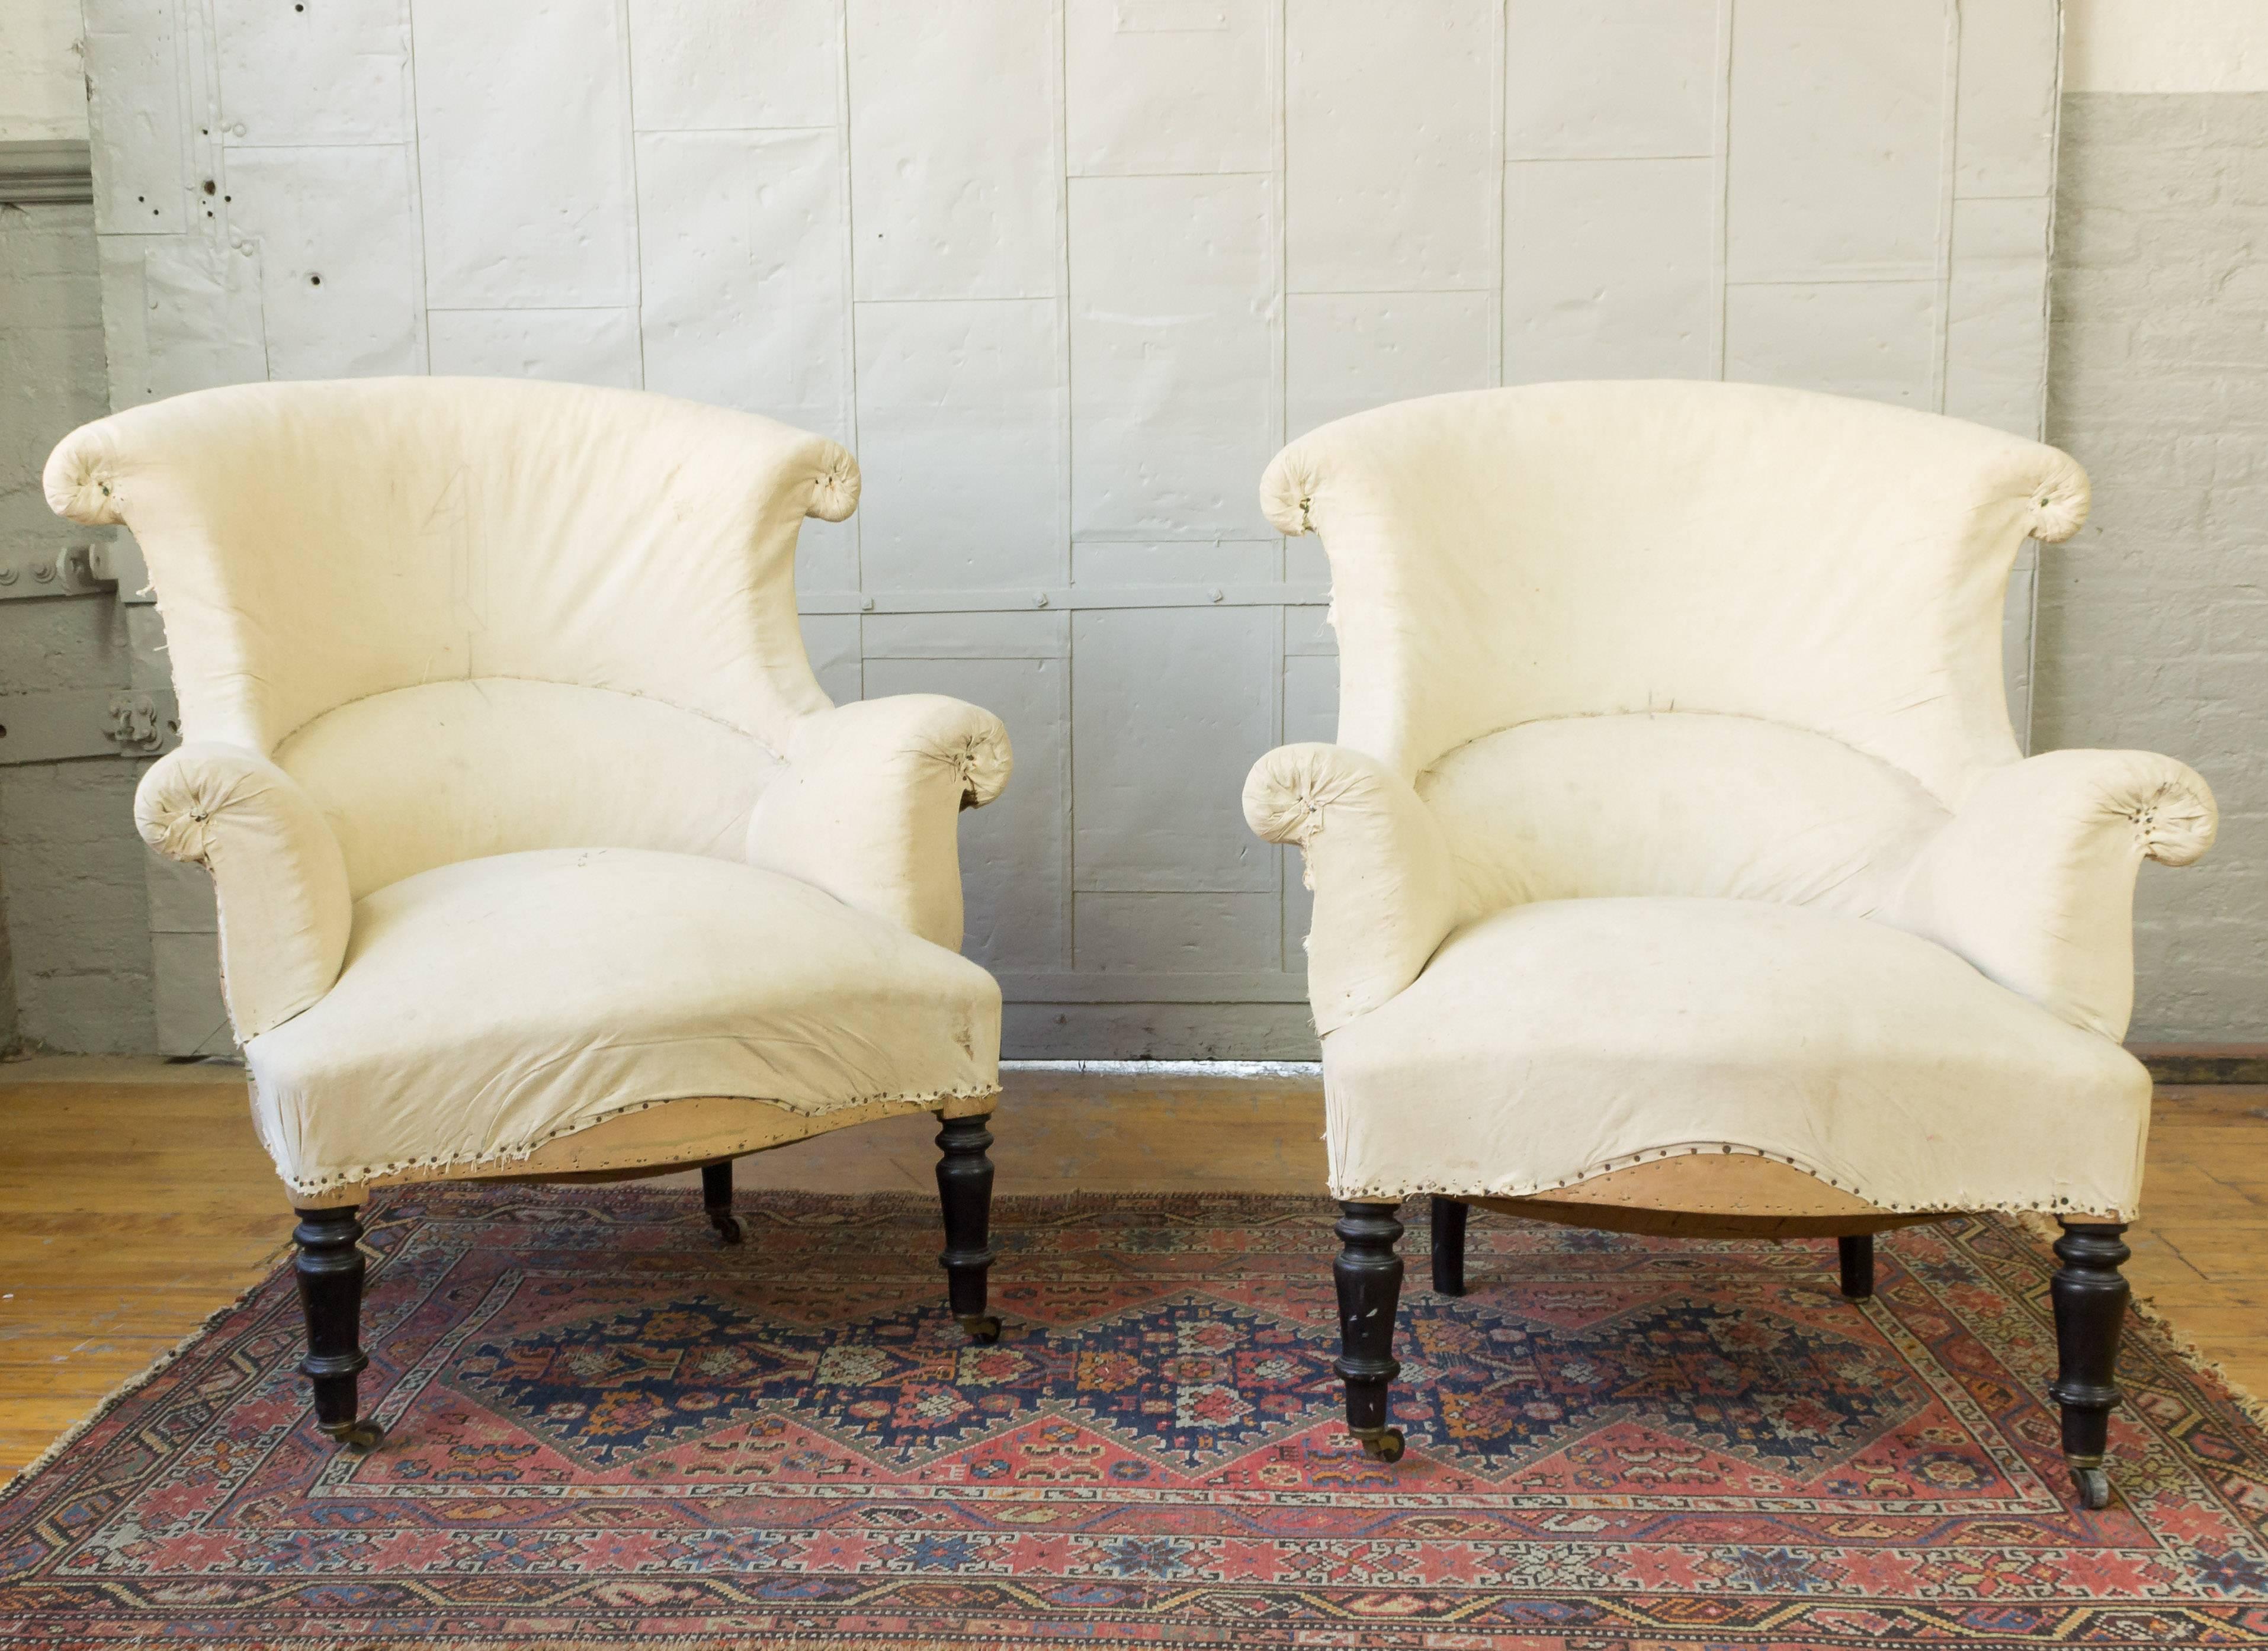 Pair of French 19th century, Napoleon III round and scroll back armchairs. Please contact for upholstery option.